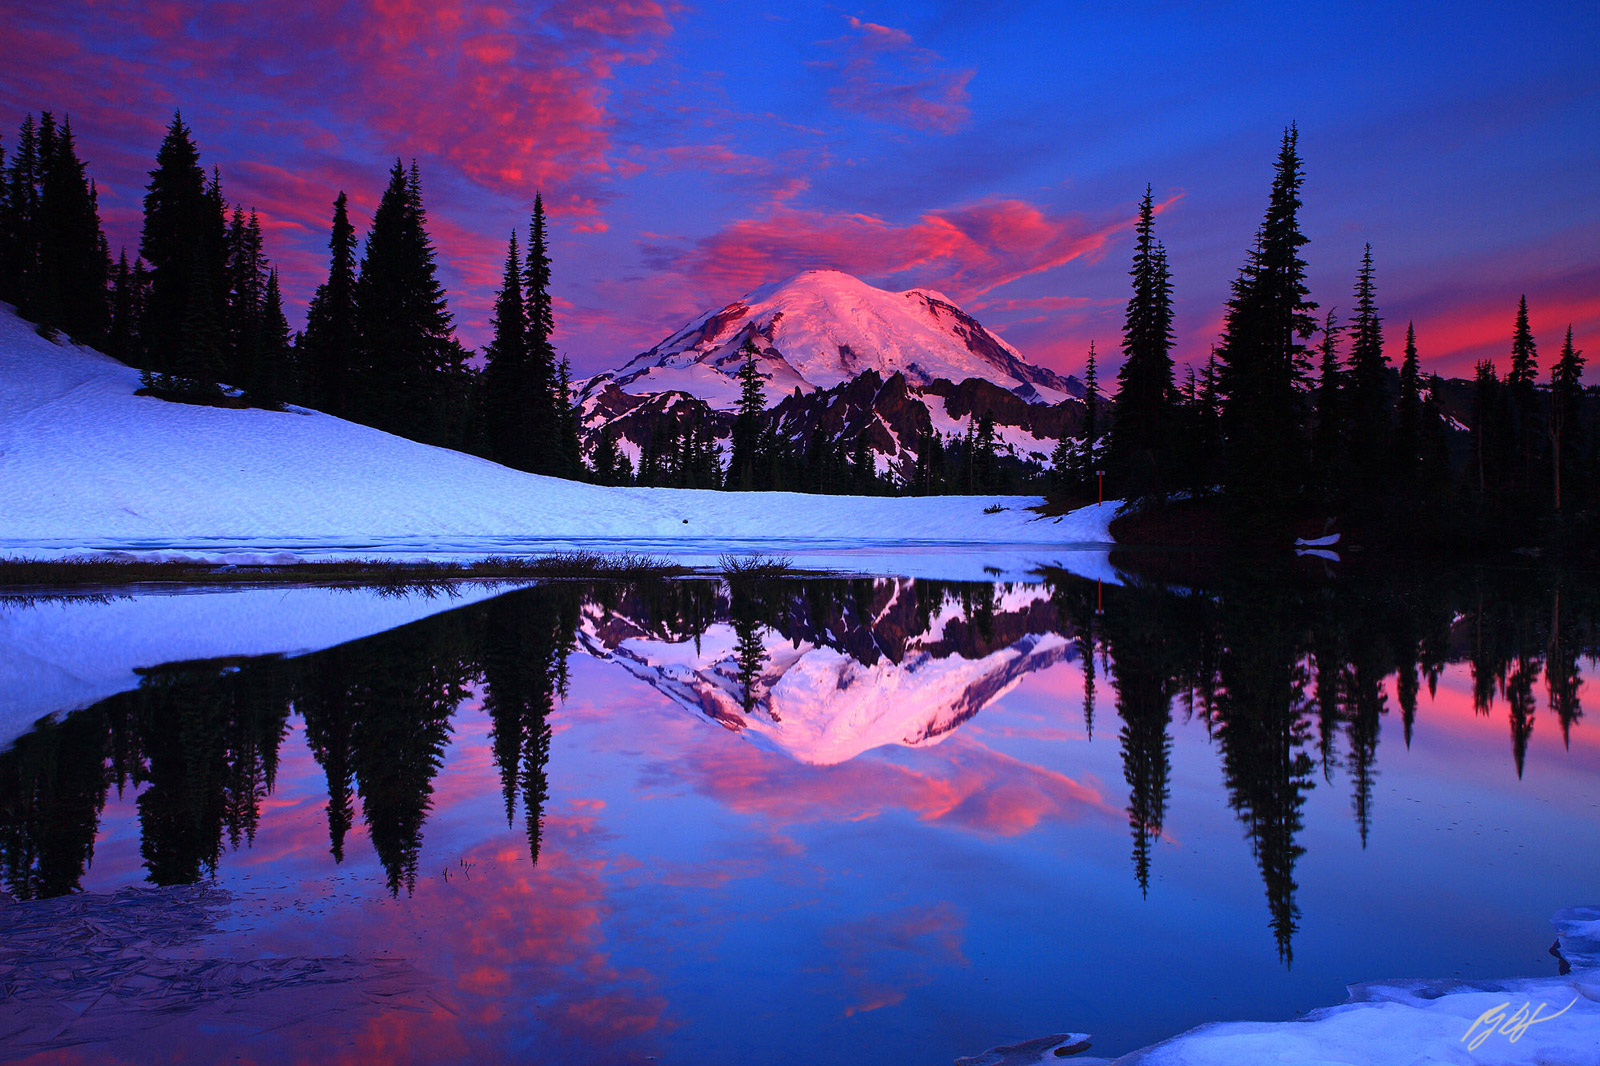 Winter Sunrise with Mt Rainer Reflected in Tipsoo Lake from Mt Rainier National Park in Washington